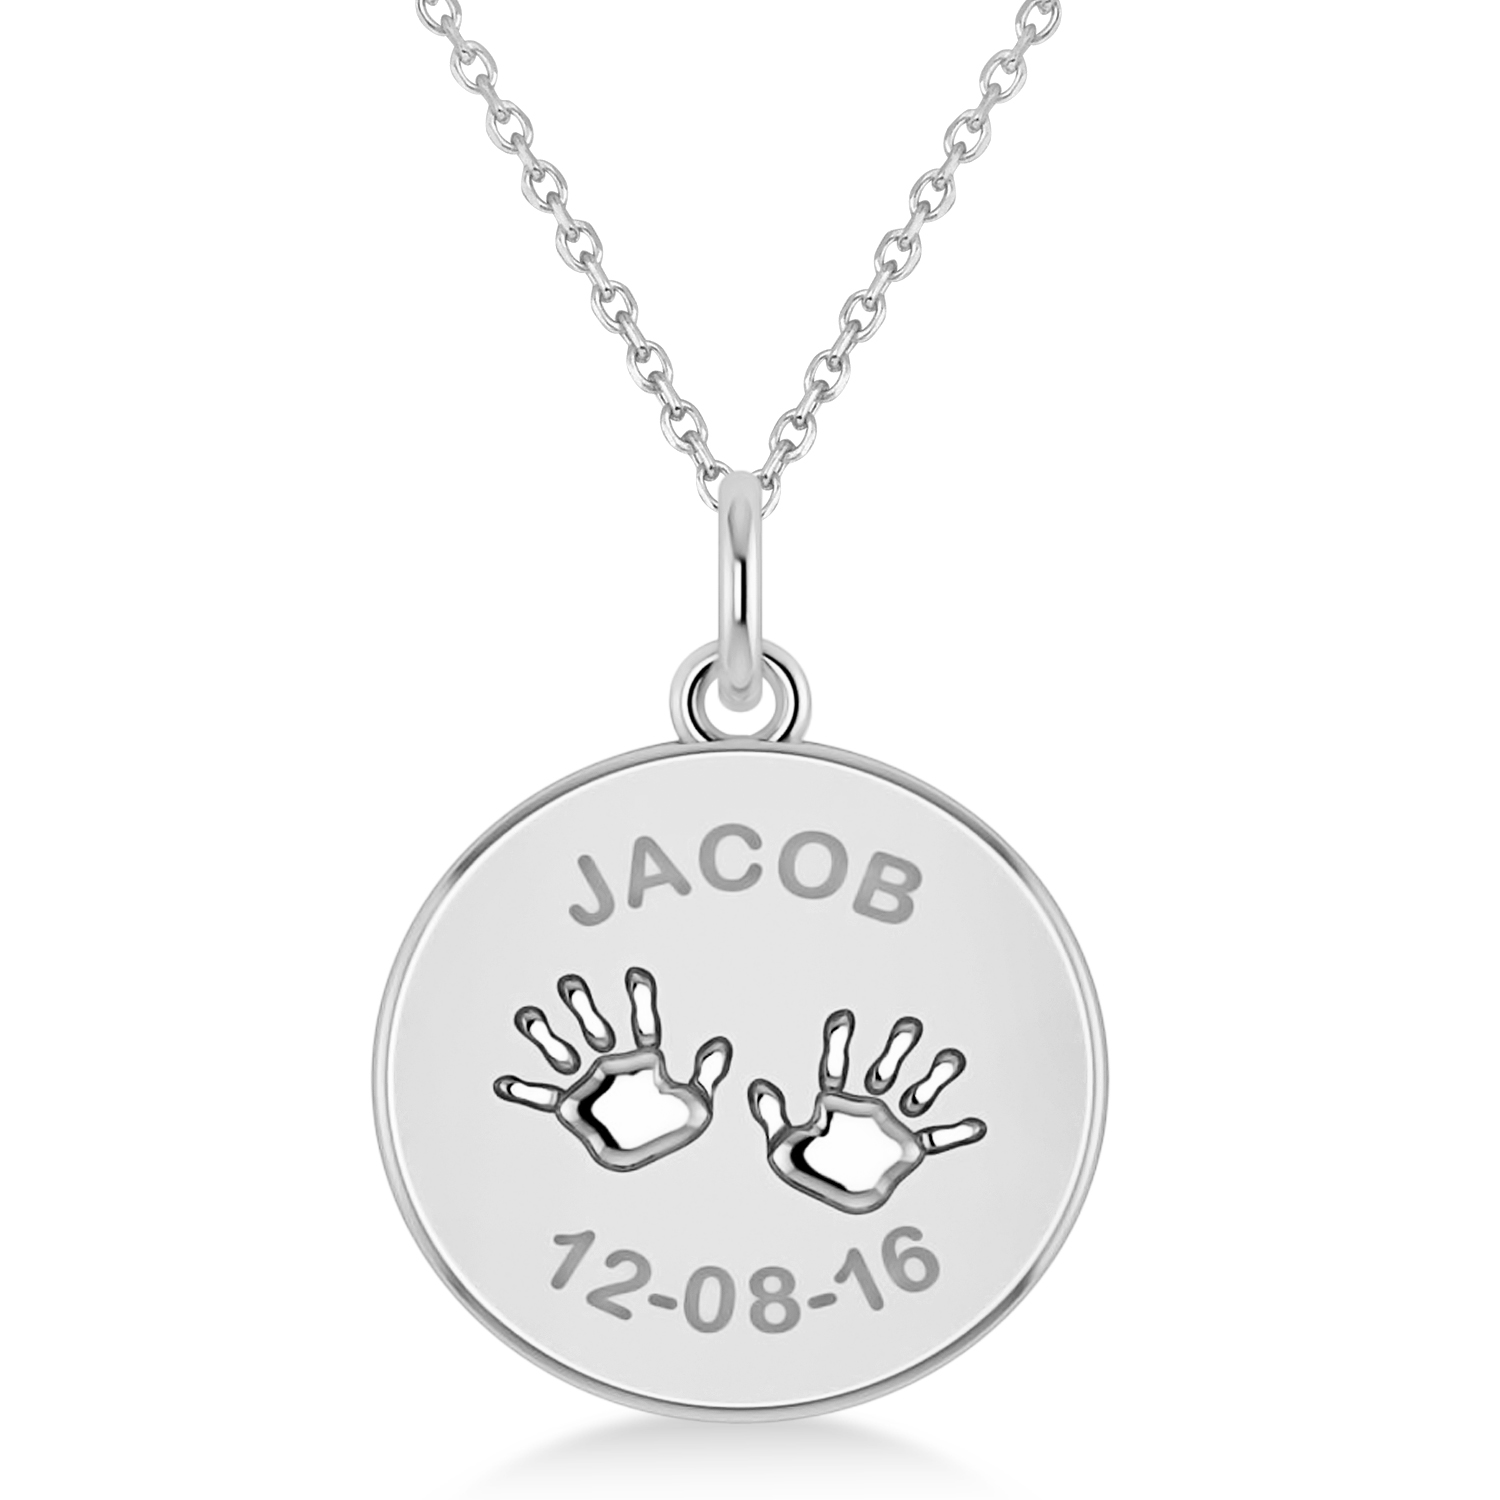 Personalized Baby Name Charm Pendant Necklace 14k White Gold from Allurez.